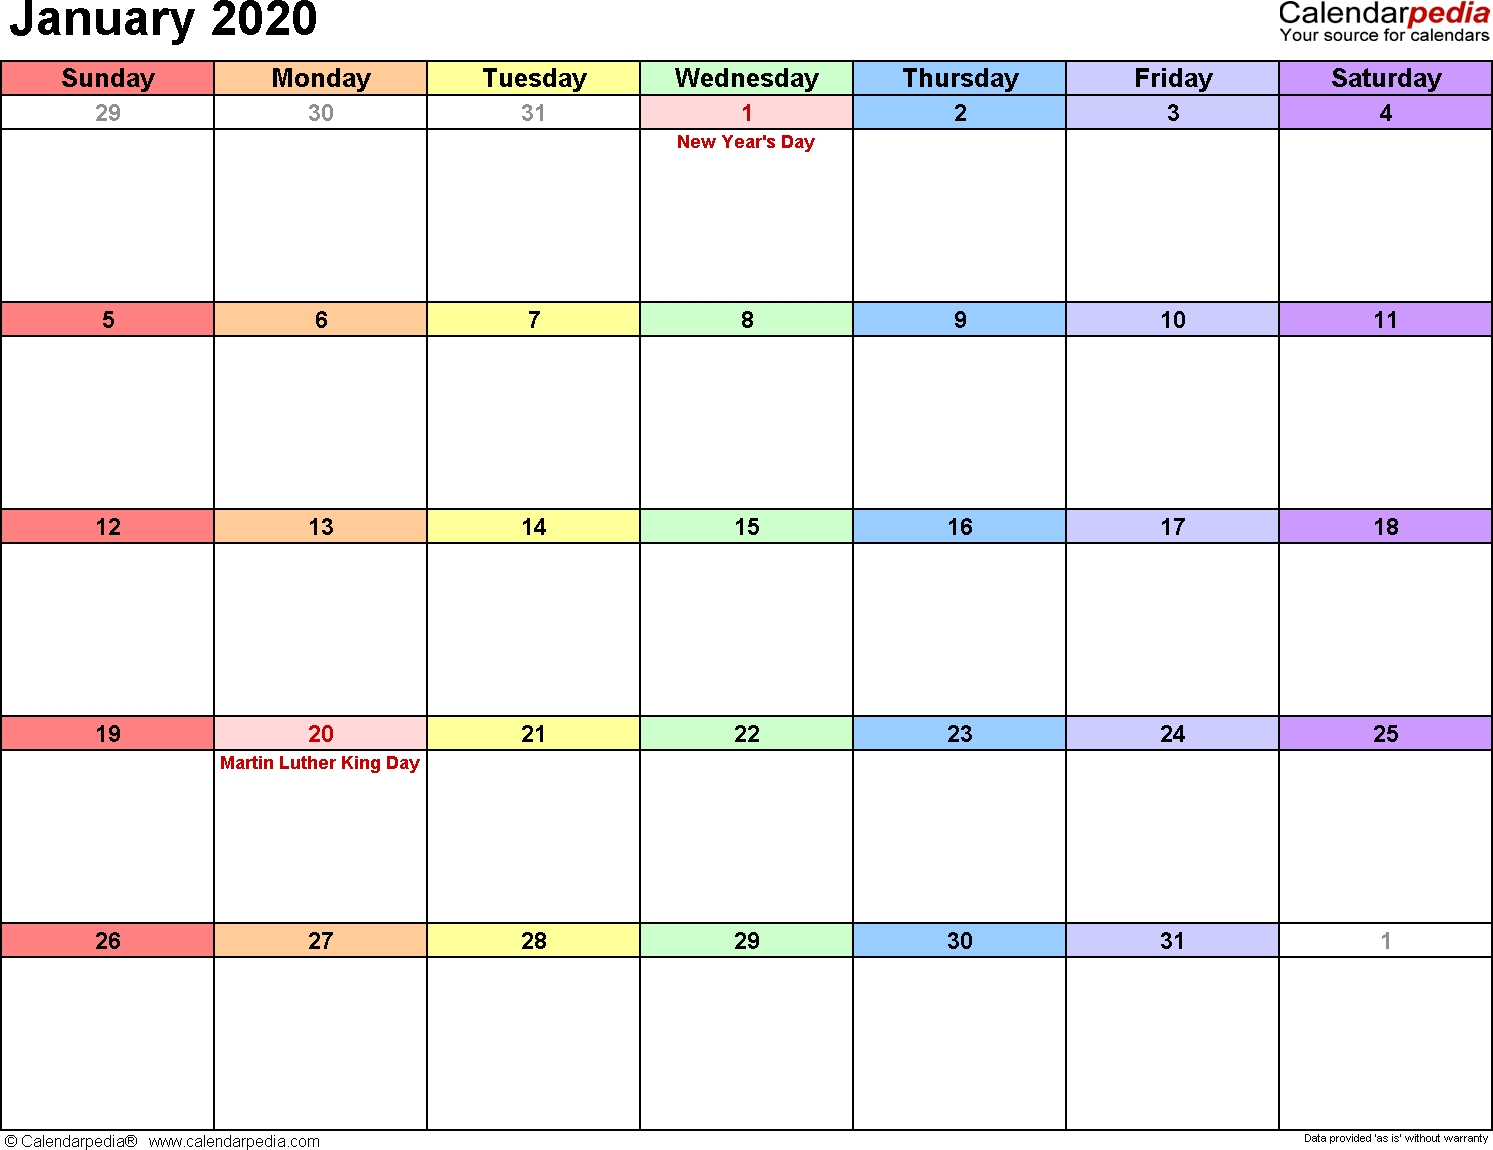 January 2020 Calendars For Word, Excel &amp; Pdf-January 2020 Calendar Events